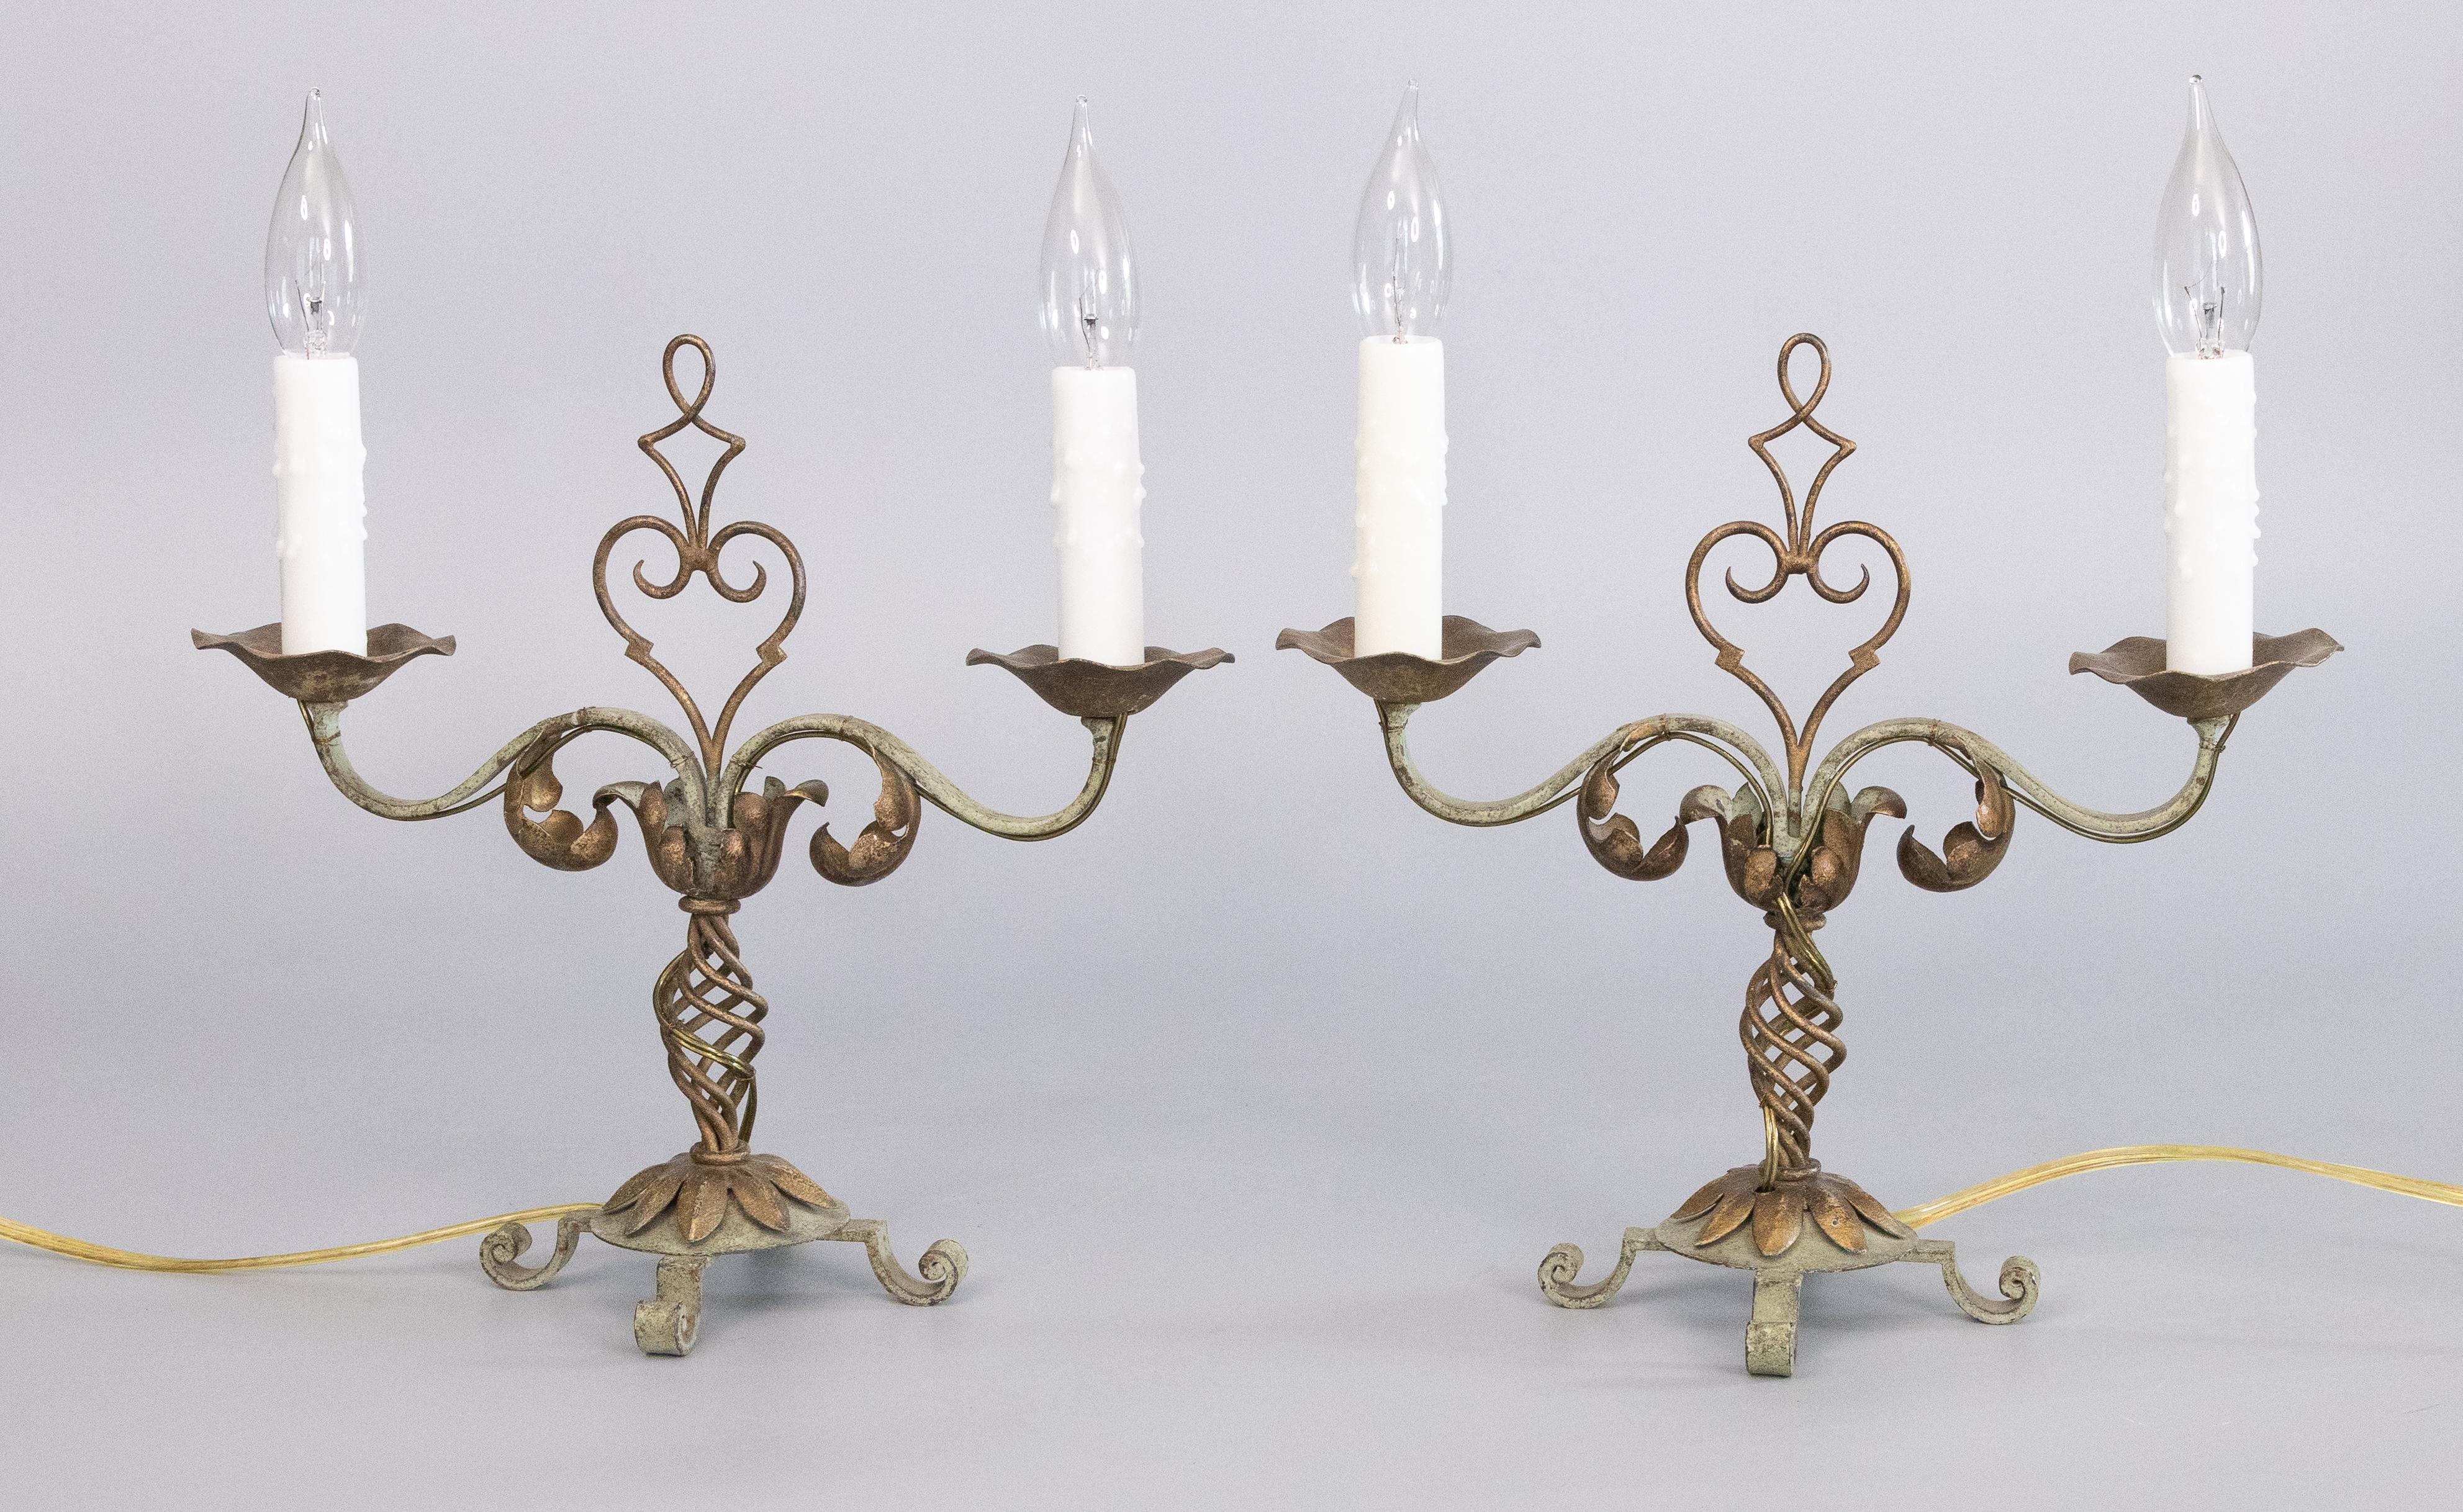 A gorgeous pair of 1930s French gilt tole and iron two light candelabras table lamps. These beautiful lamps are hand painted with lovely gold and light verdigris colors and accented with drippy wax candle sleeves. They are in excellent working